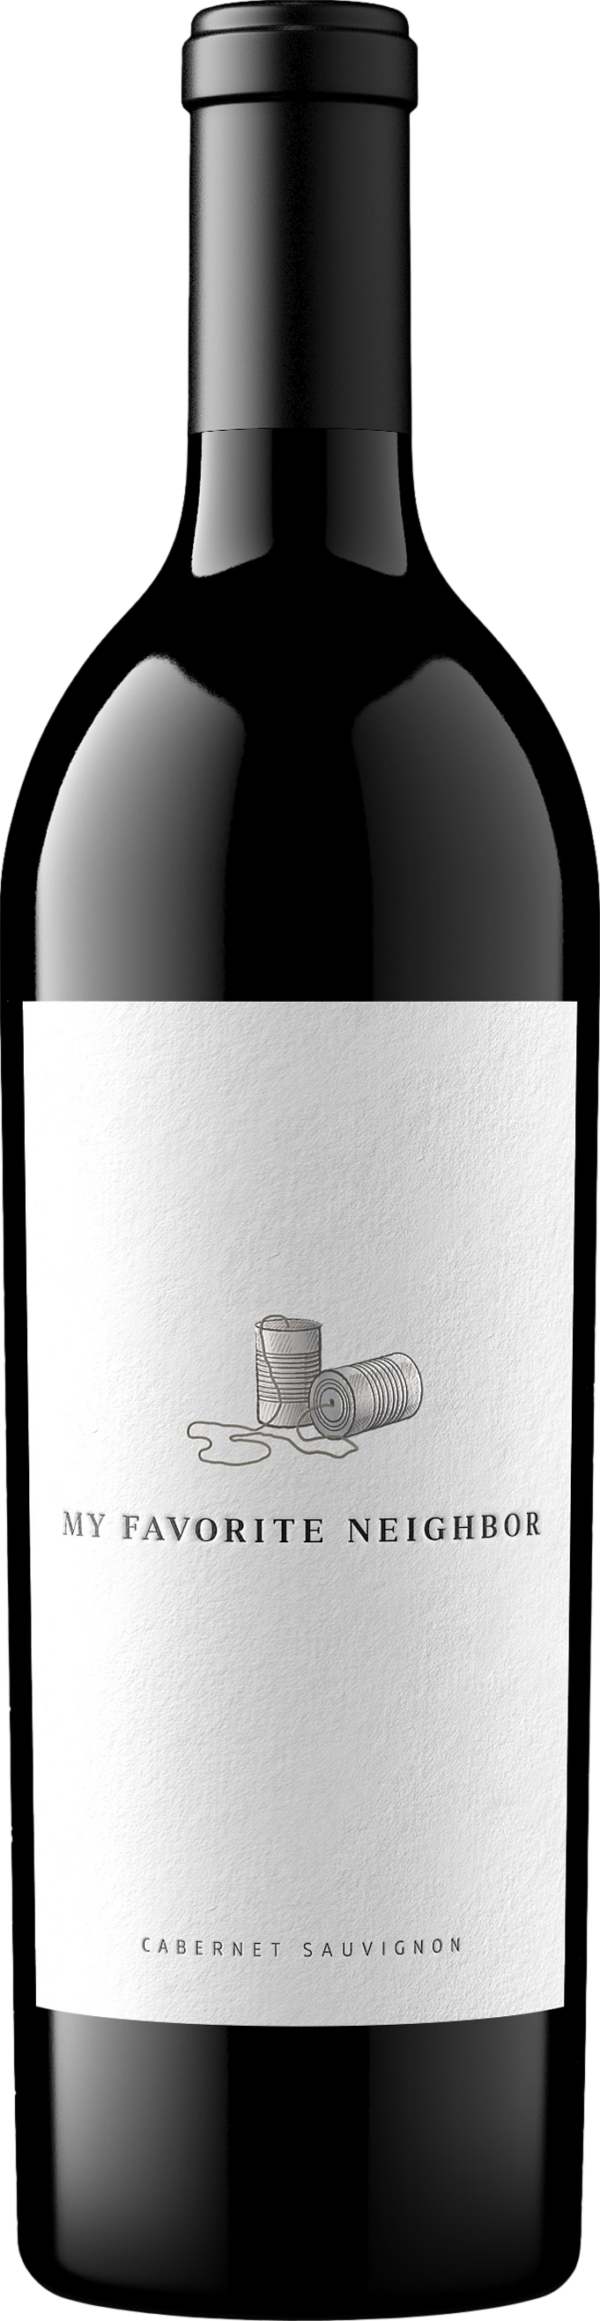 Product image of My Favorite Neighbor Cabernet Sauvignon 2021 from 8wines